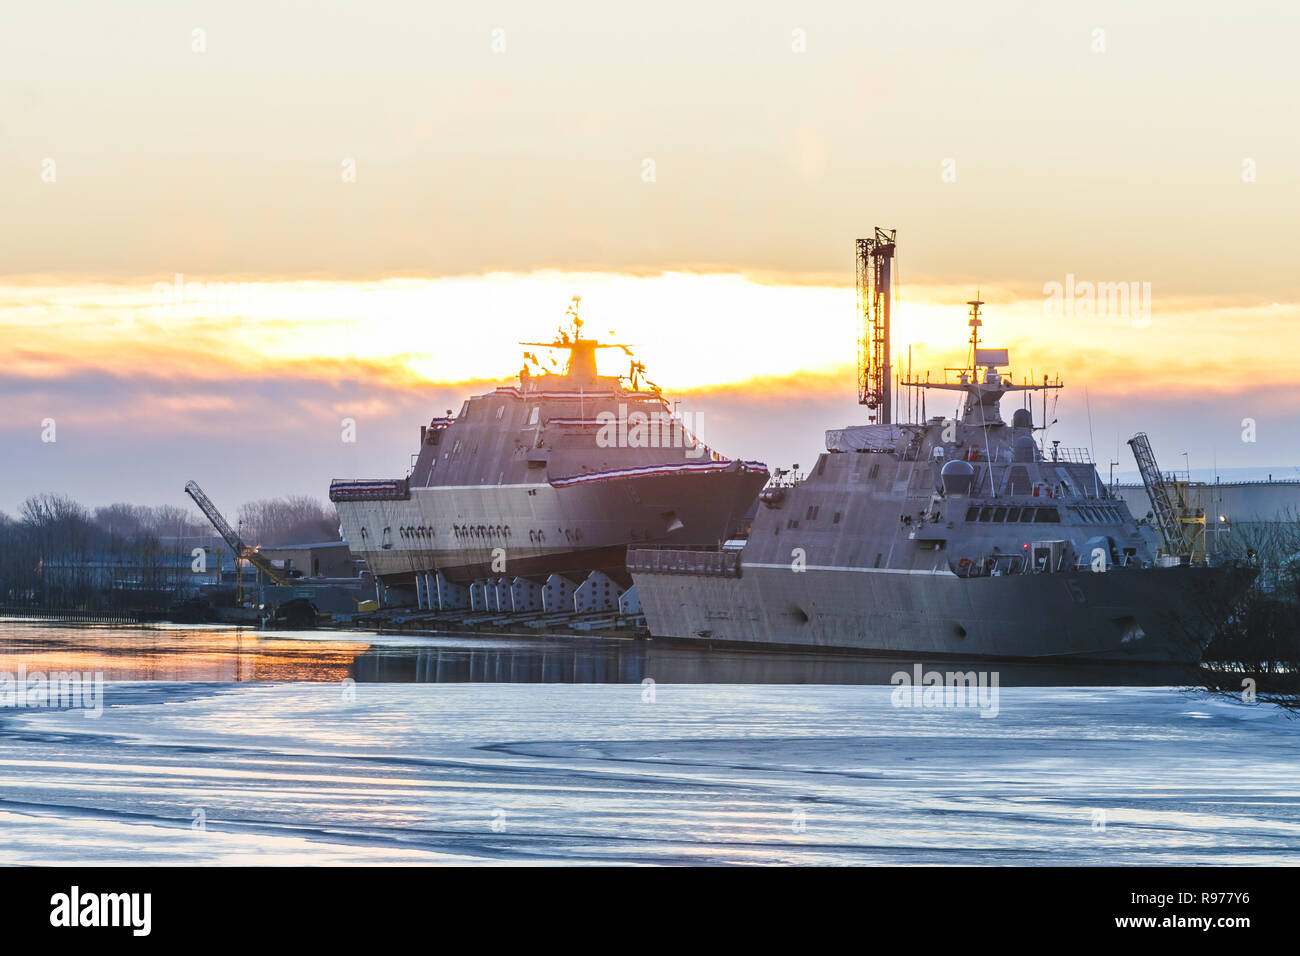 181215-N-N0101-112 MARINETTE, Wisc. (Dec. 15, 2018) The Navy prepares to christen the future littoral combat ship USS St. Louis (LCS 19), left, in Marinette, Wisconsin, Dec. 15, 2018, as USS Billings (LCS 15) is under construction and preparing for commissioning. Once commissioned, LCS-19 will be the seventh ship to bear the name St. Louis, while LCS-15 will be the first U.S Navy ship named after Billings, Montana. (U.S. Navy photo/Released) Stock Photo